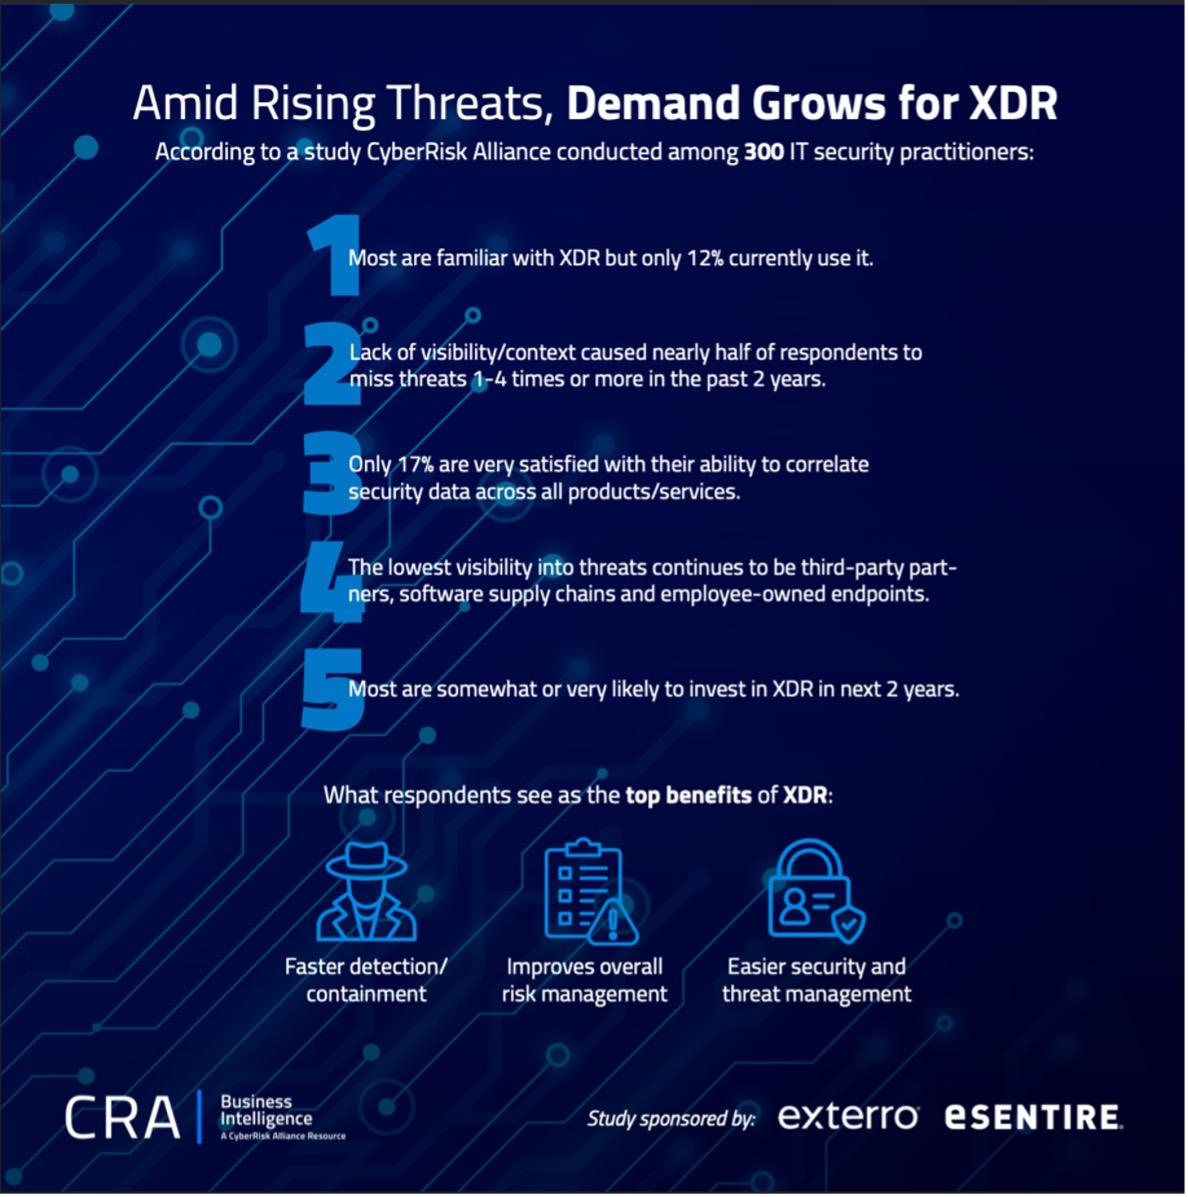 XDR demand grows